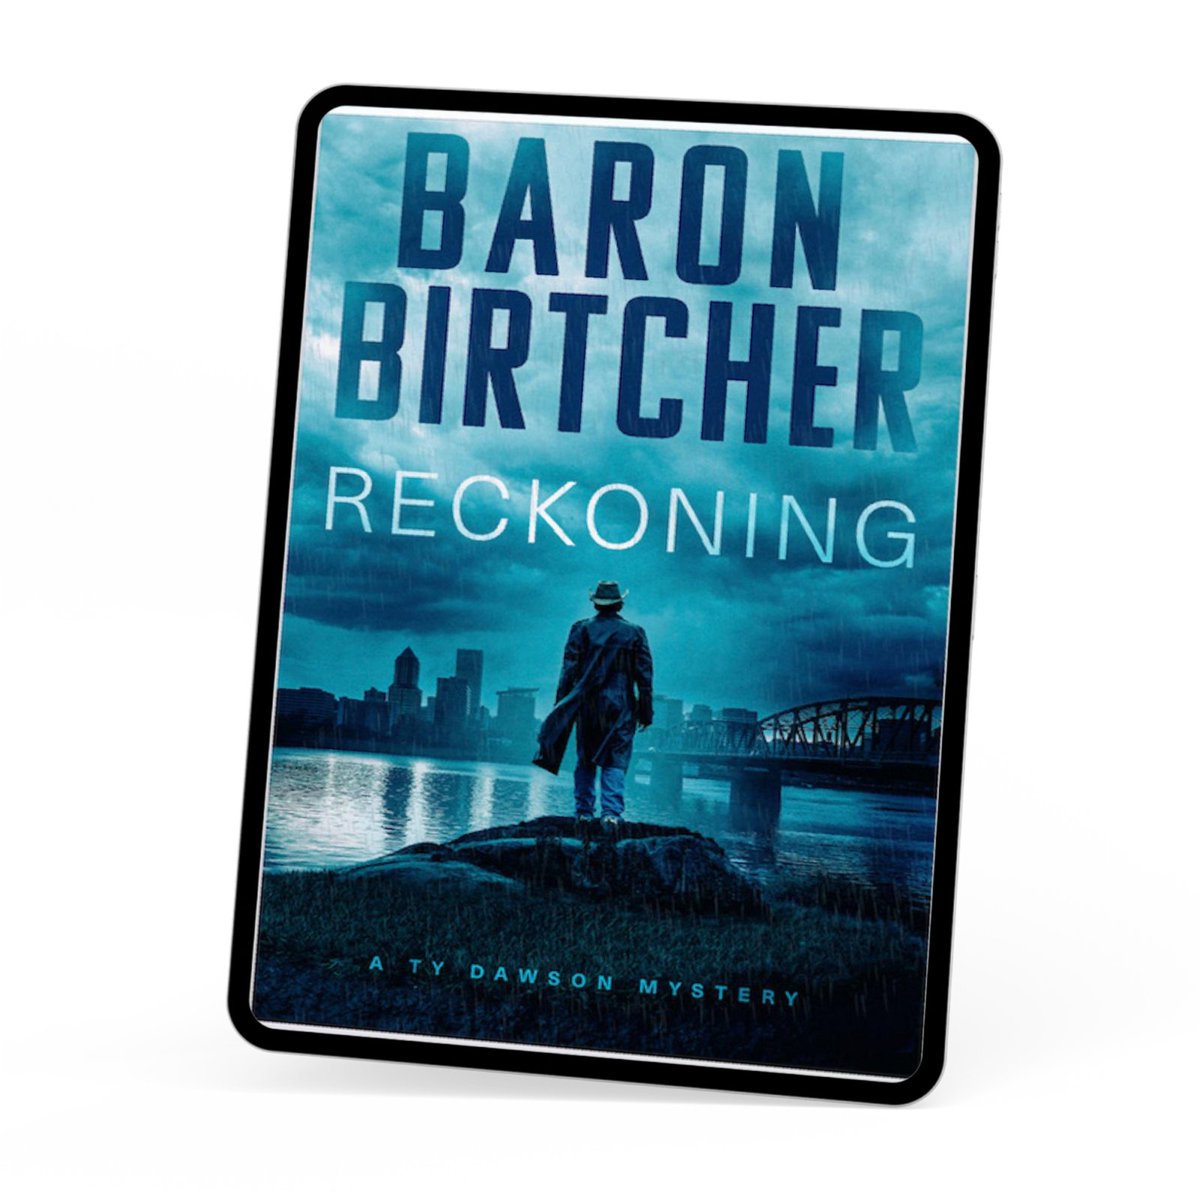 'When a book gets me all riled up and I myself want to see justice done, that’s when I can’t recommend it enough... 5 STARS' for #Reckoning #BaronBirtcher! - @laurathomas61 #fuonlyknew #BookRecommendation 

bit.ly/403Xkoy

#MysteryBookReview #GreatBook #CrimeThriller